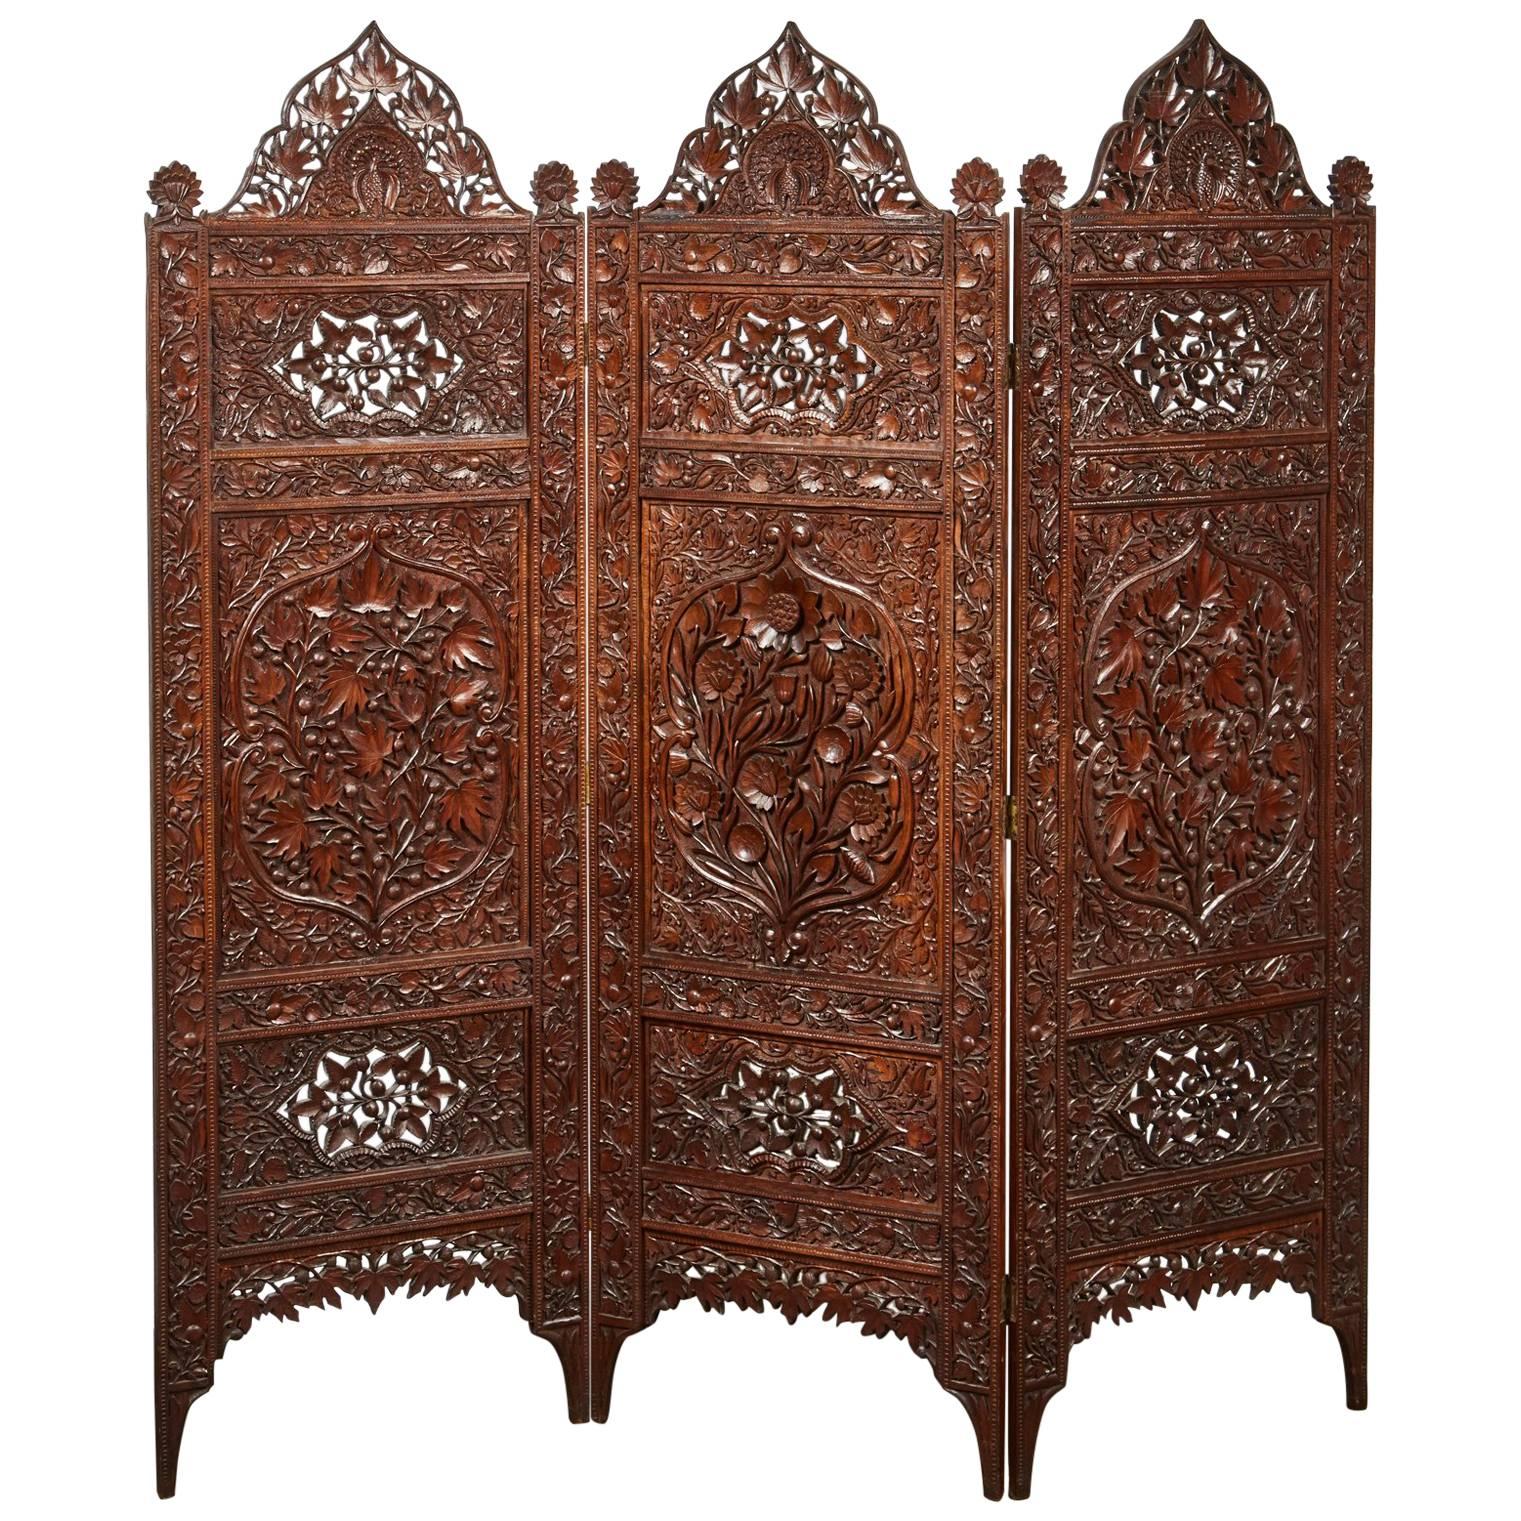 Three-Panel 20th Century Indian Carved Screens